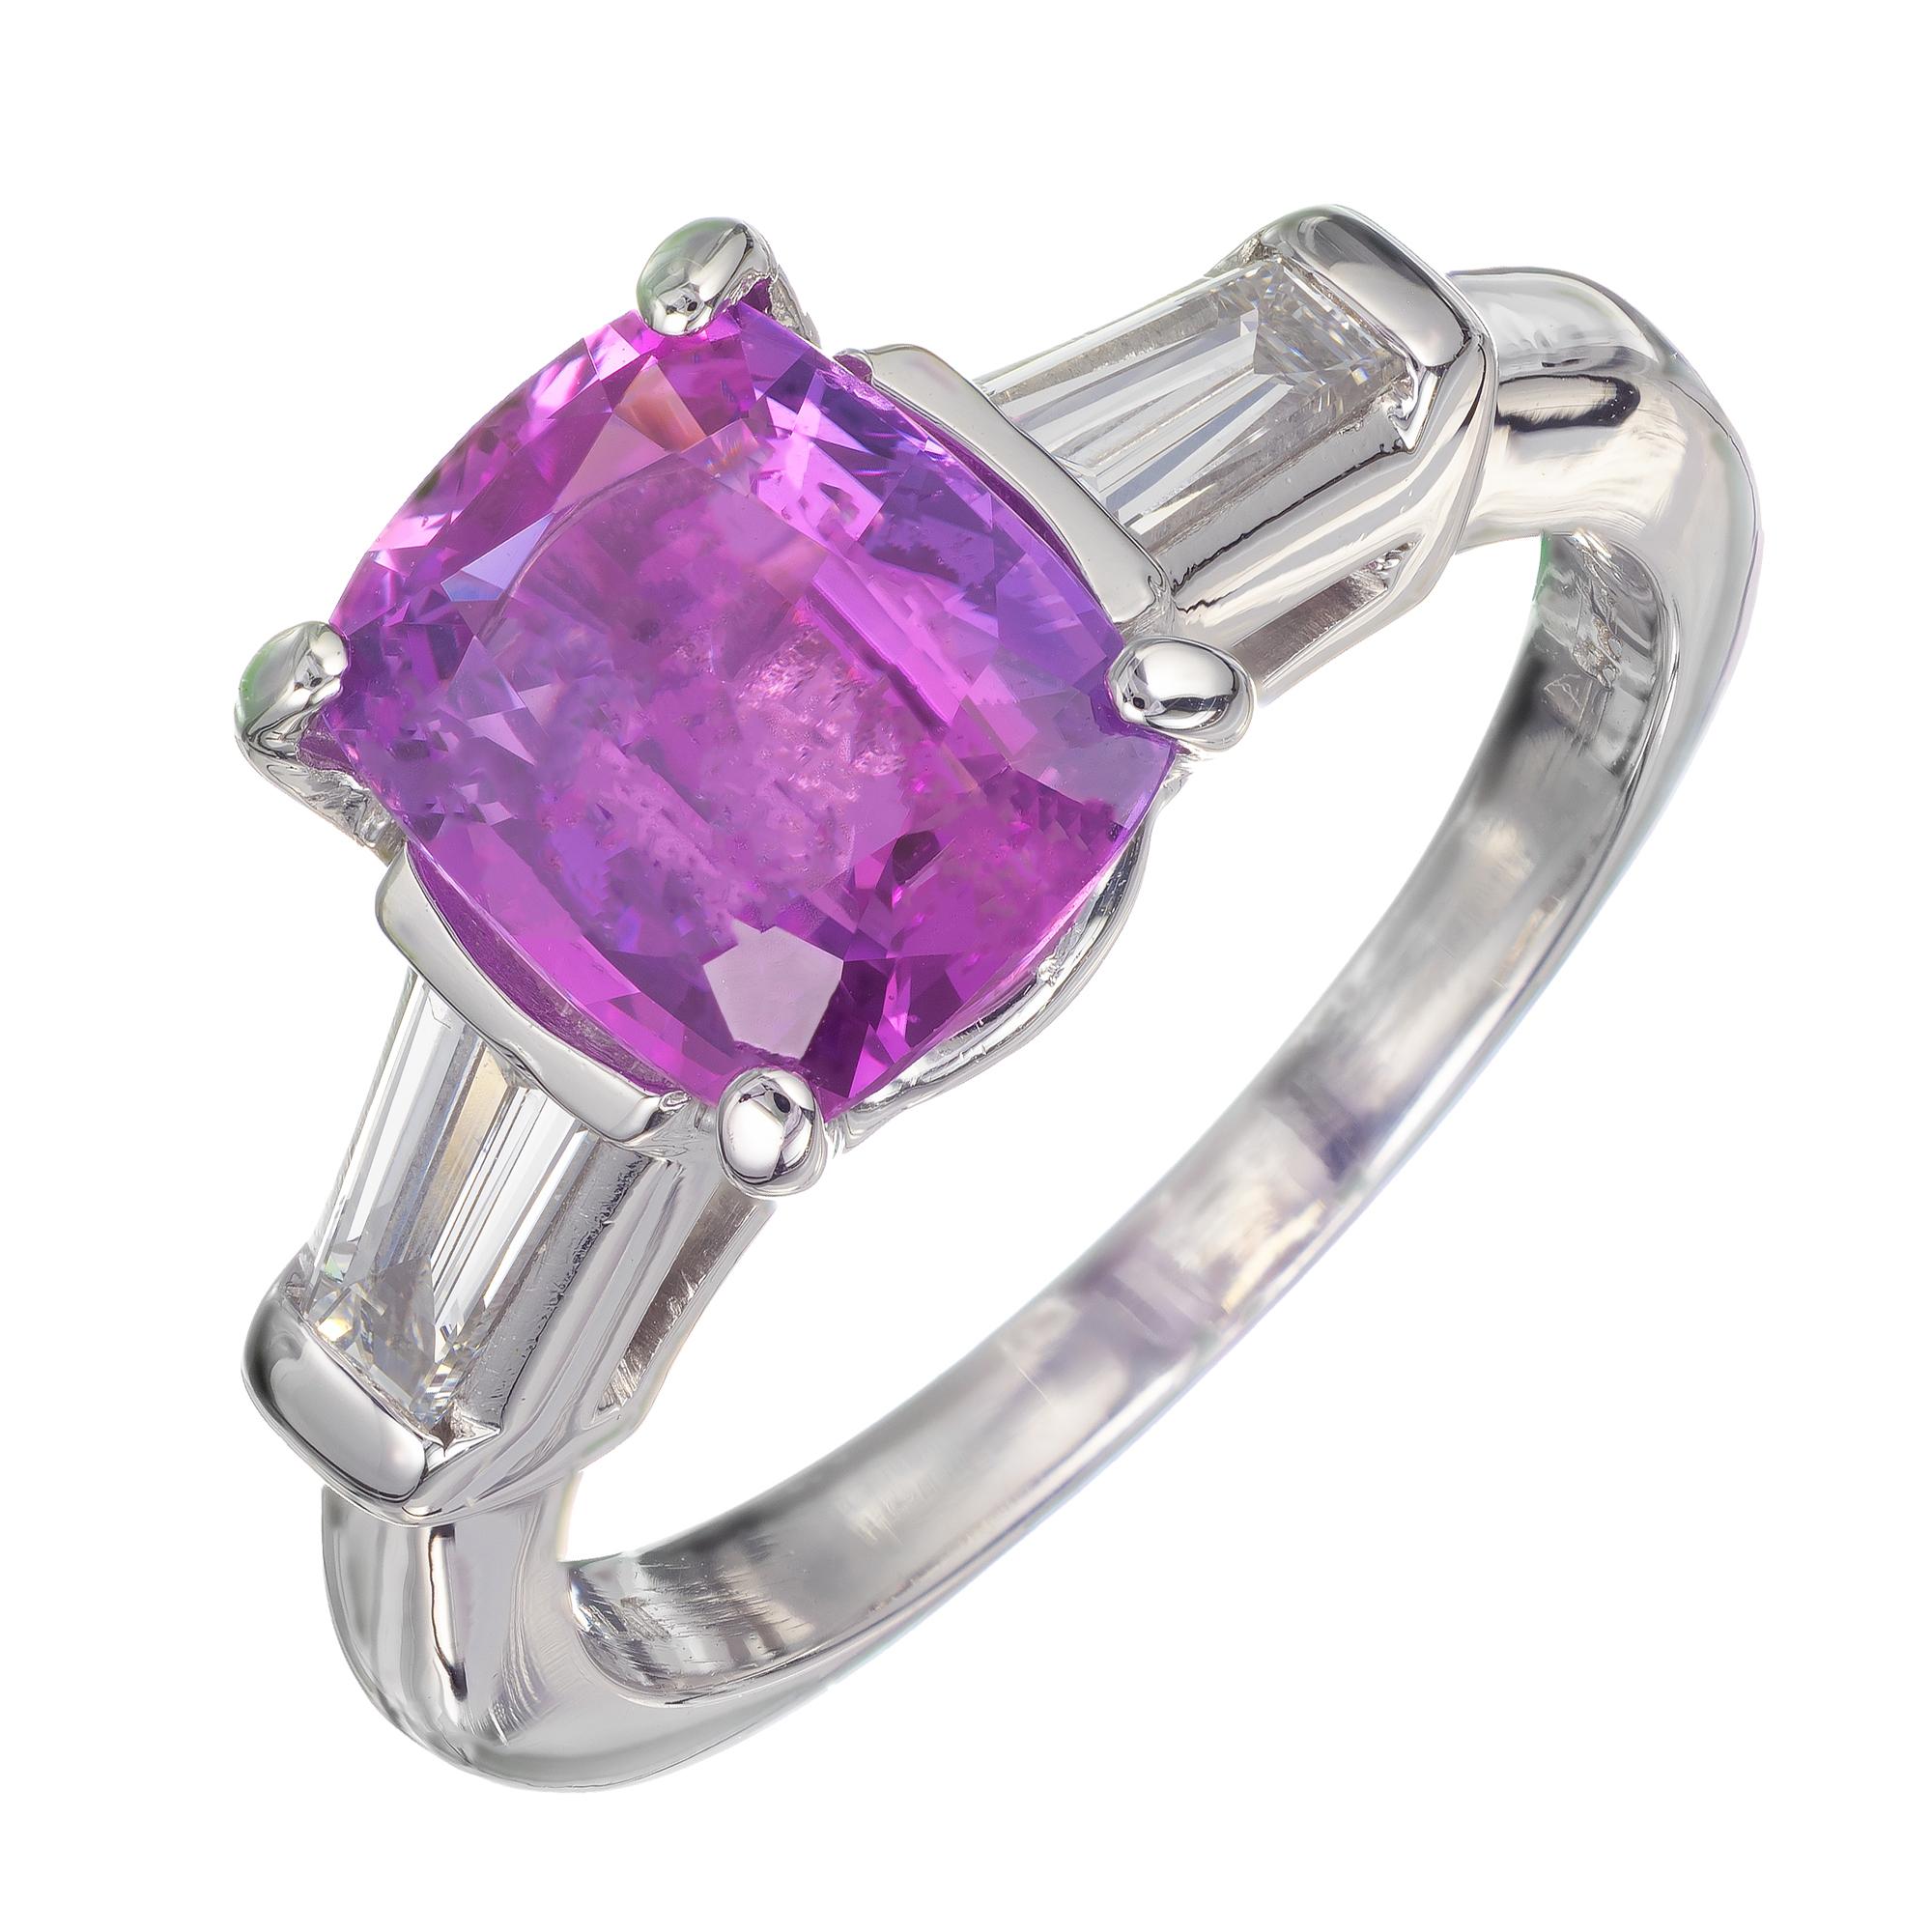 Pink purple sapphire and diamond three-stone engagement ring. AGL certified natural no heat estate cushion pink purple 2.67 carat center sapphire set into a custom-made platinum classic three-stone ring with accent baguette diamonds.

1 cushion